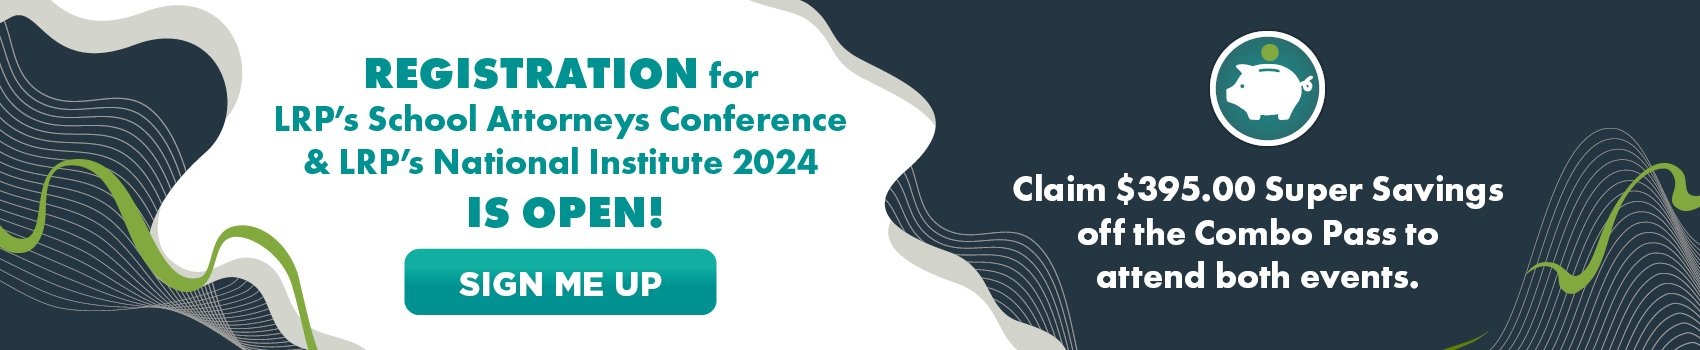 Registration for LRP’s School Attorneys Conference & LRP’s National Institute 2024 is open! Claim $395.00 Super Savings off the Combo Pass to attend both events. Sign Me Up